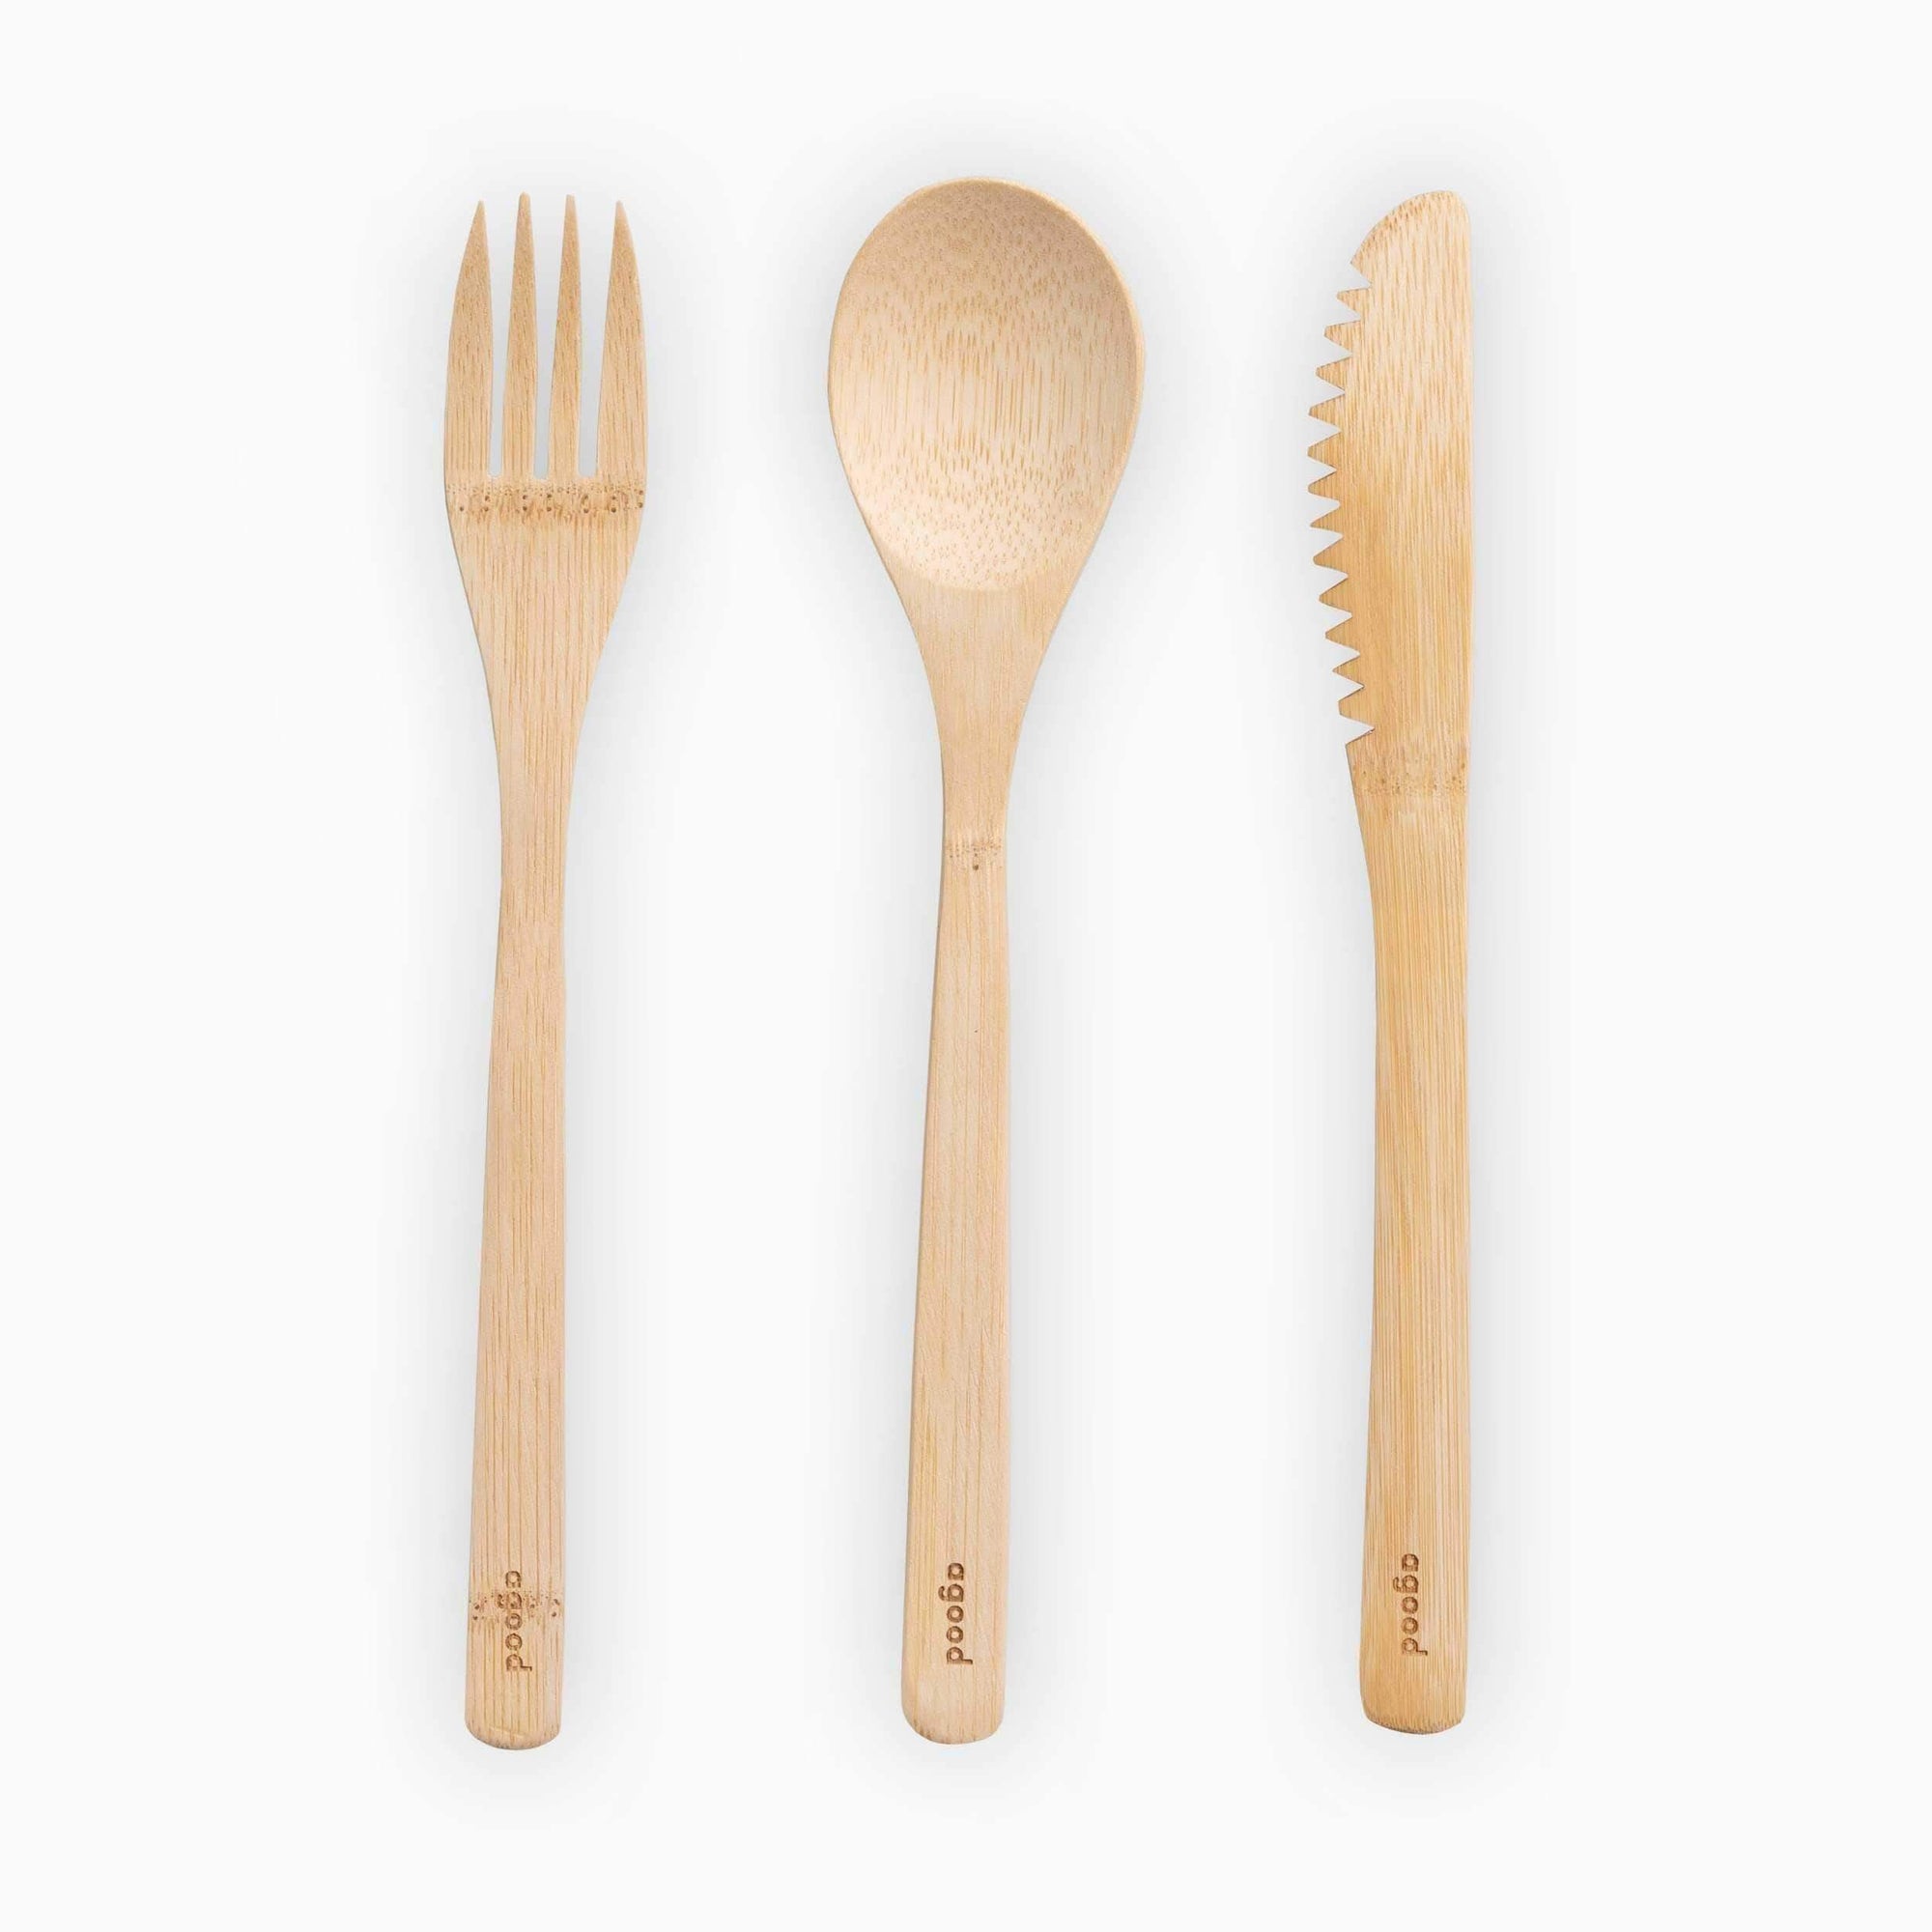 Sustainable solution for cutlery